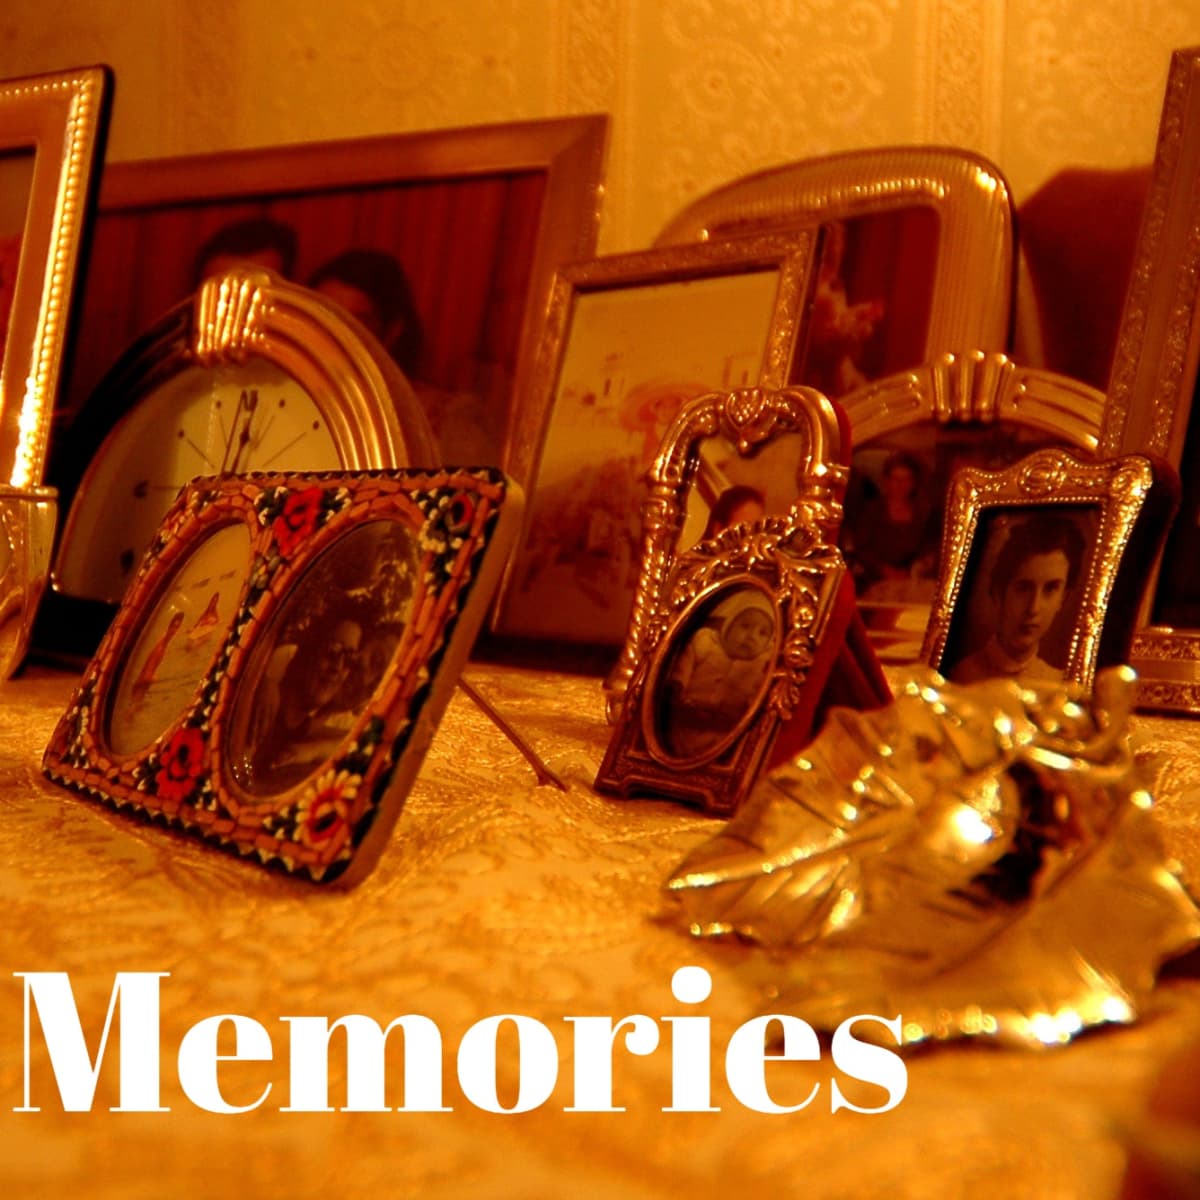 23 Songs About Memories - Spinditty